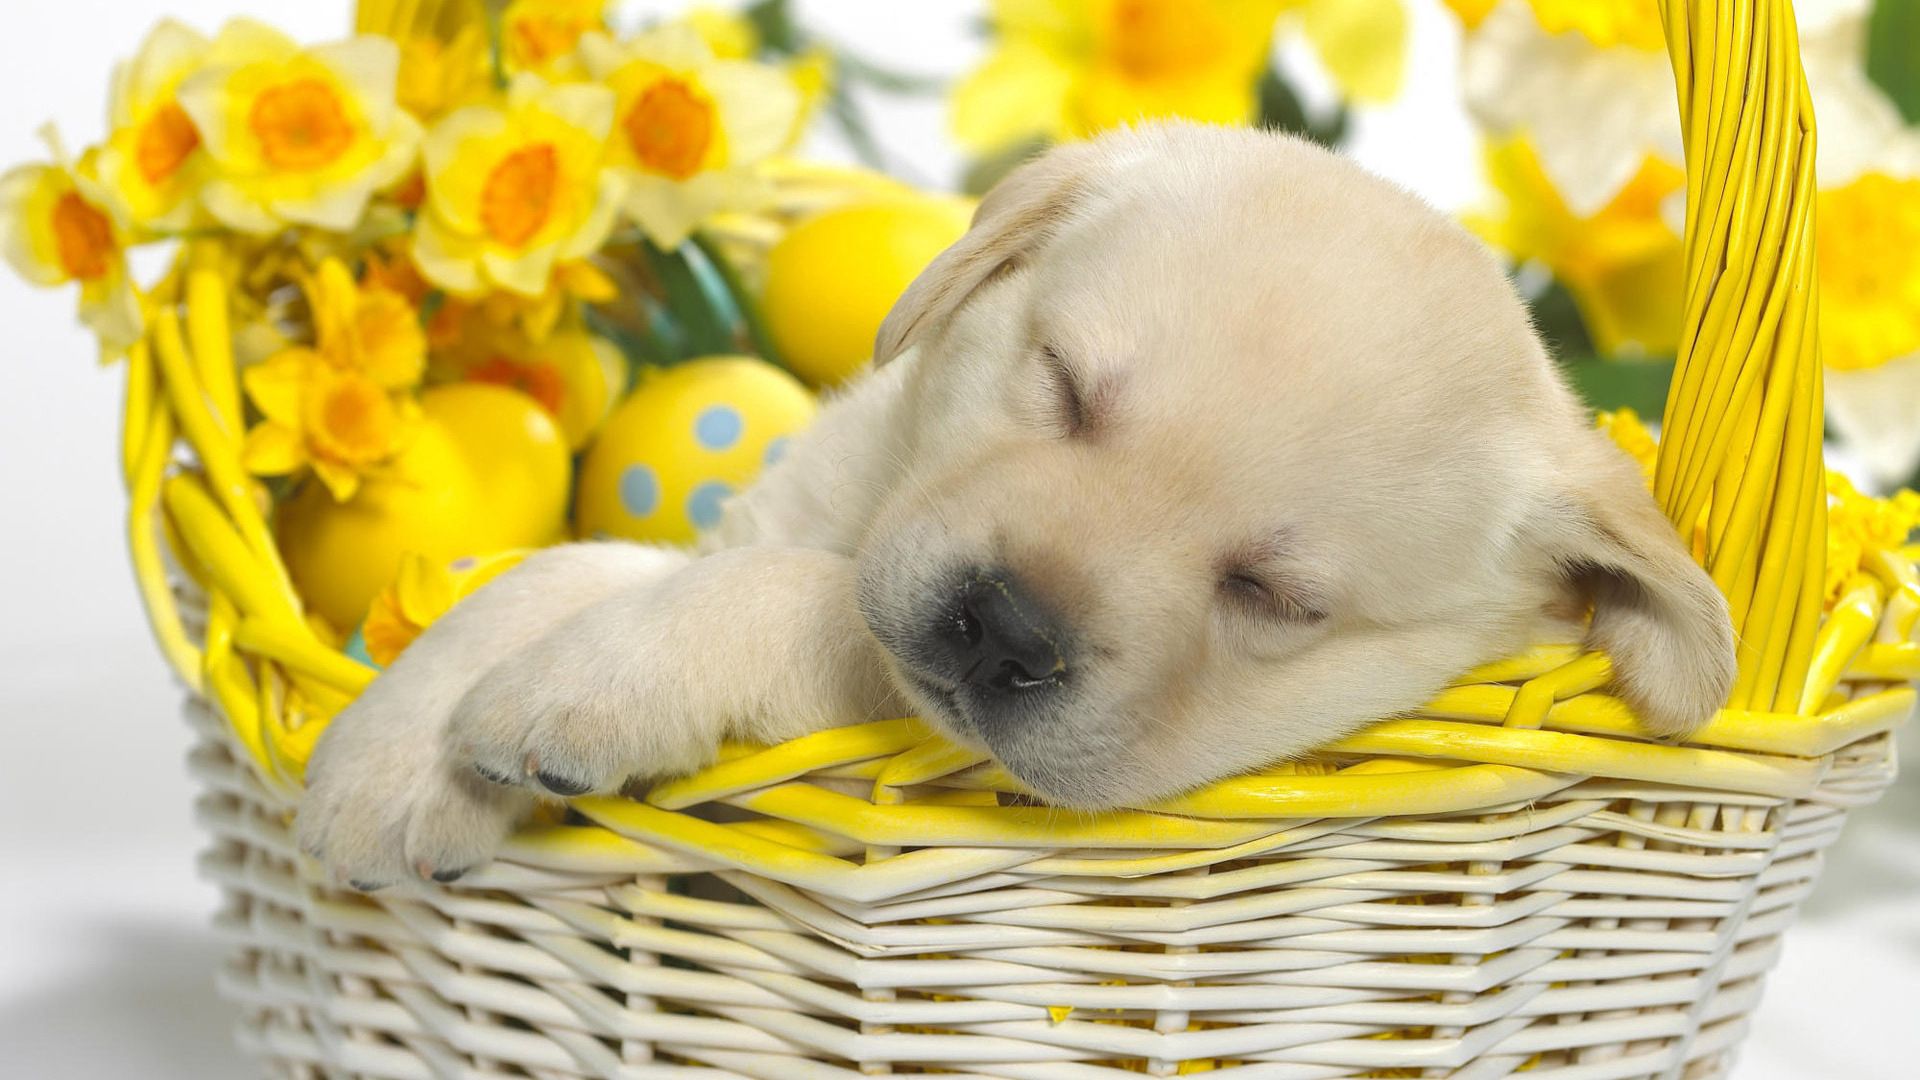 labrador, animals, flowers, eggs, easter, puppy, sleep, dream, basket for android